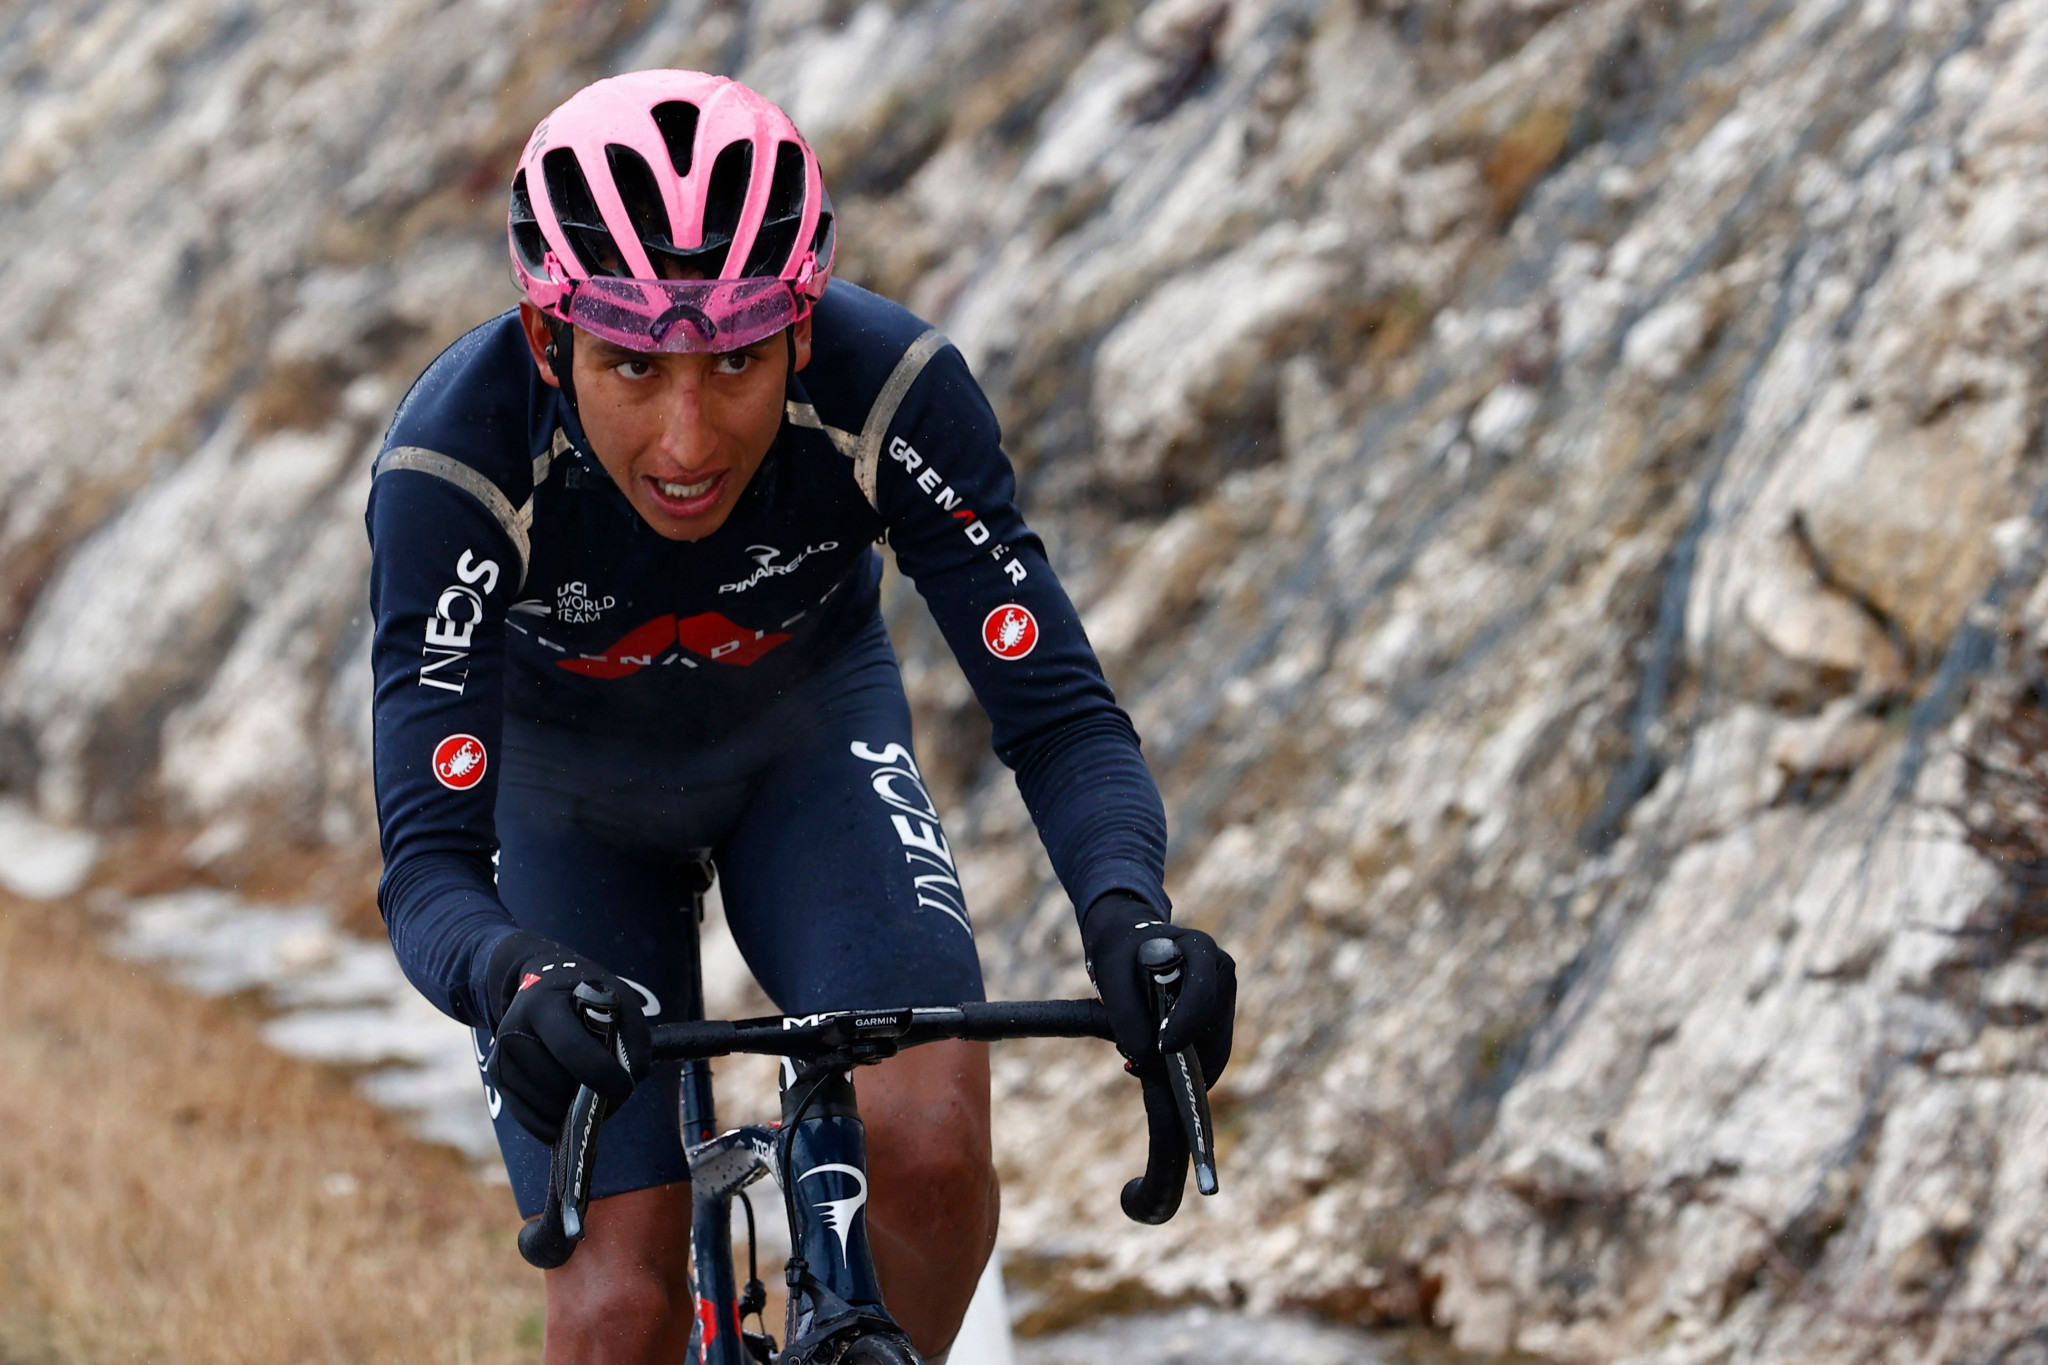 In 2019, Egan Bernal won the Tour de France, becoming the youngest winner since 1909 ©Getty Images